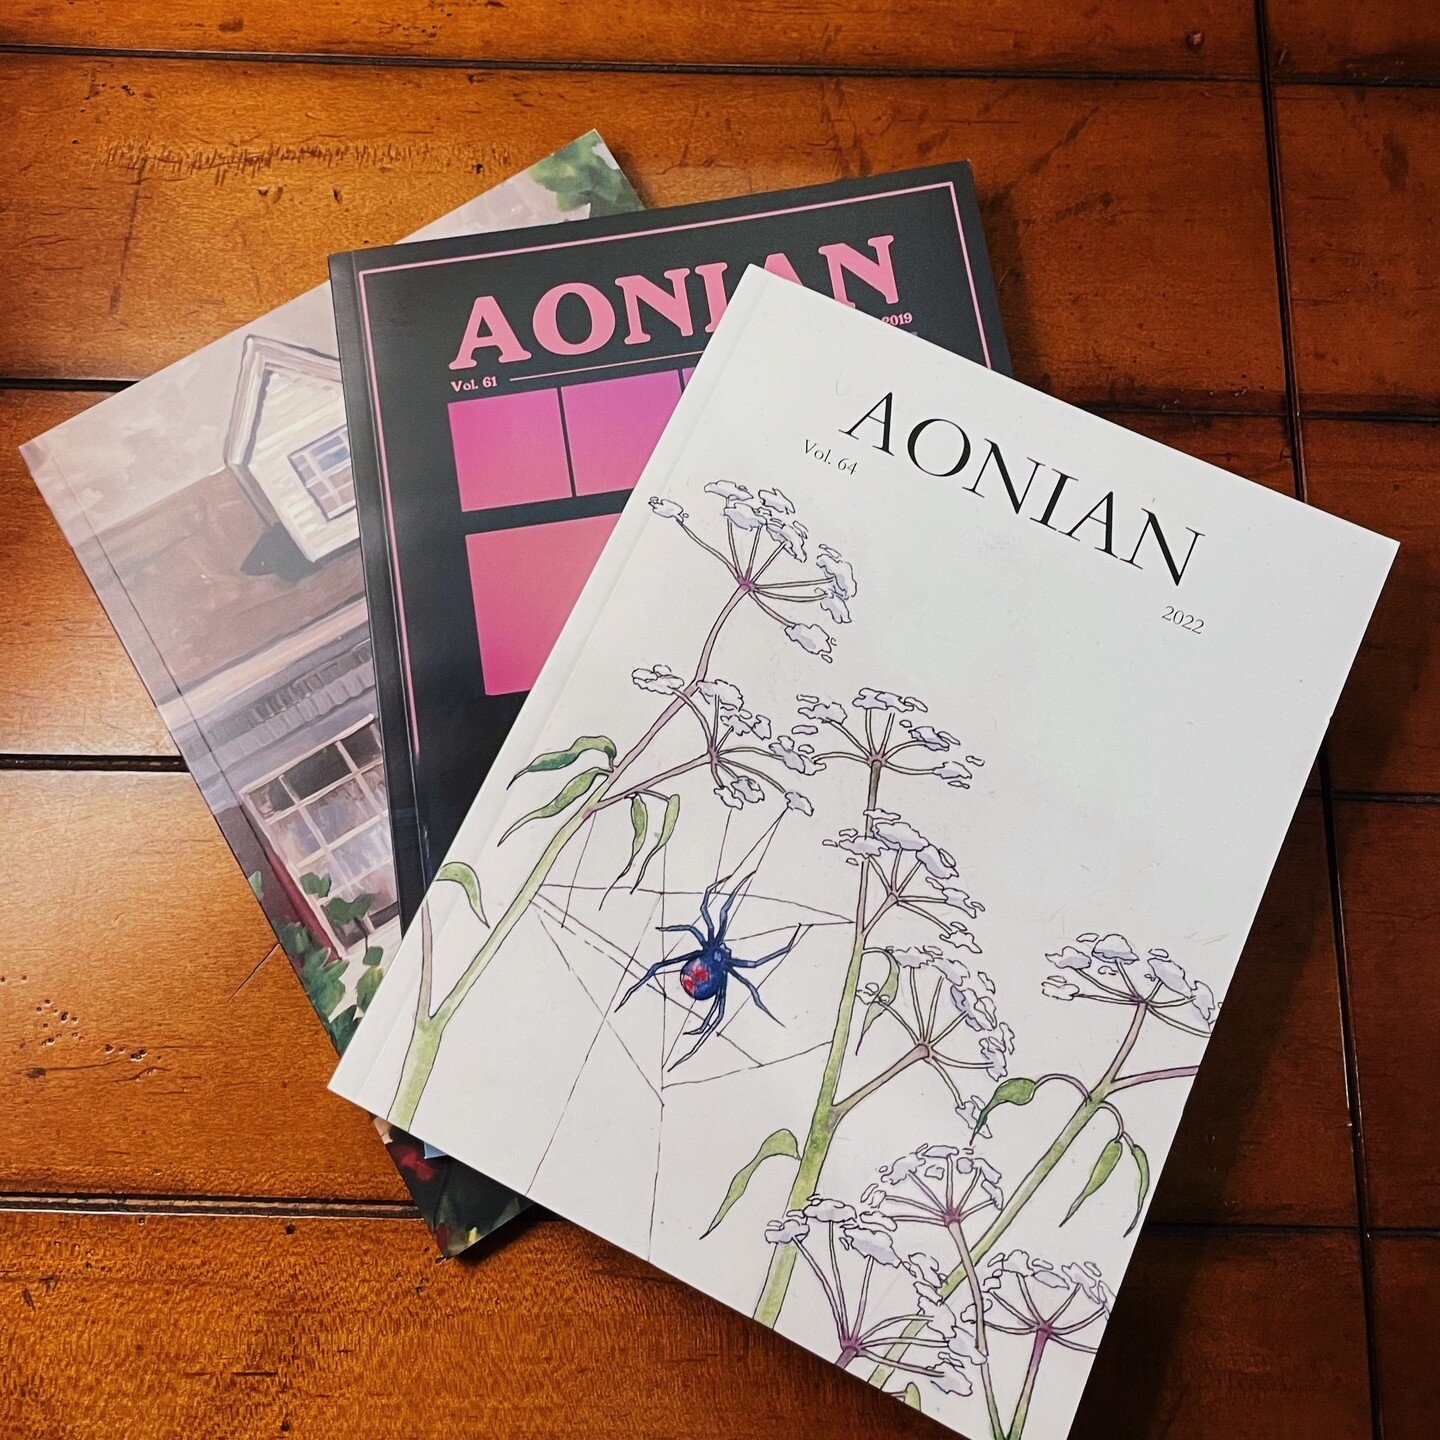 Do you have creative work to share? ✏️ The Aonian Literary magazine is open for submissions! Send in your poetry, prose, art, and photography to the Aonian by emailing Aoniansubmissions@gmail.com! The Aonian publishes student work, and there are mone